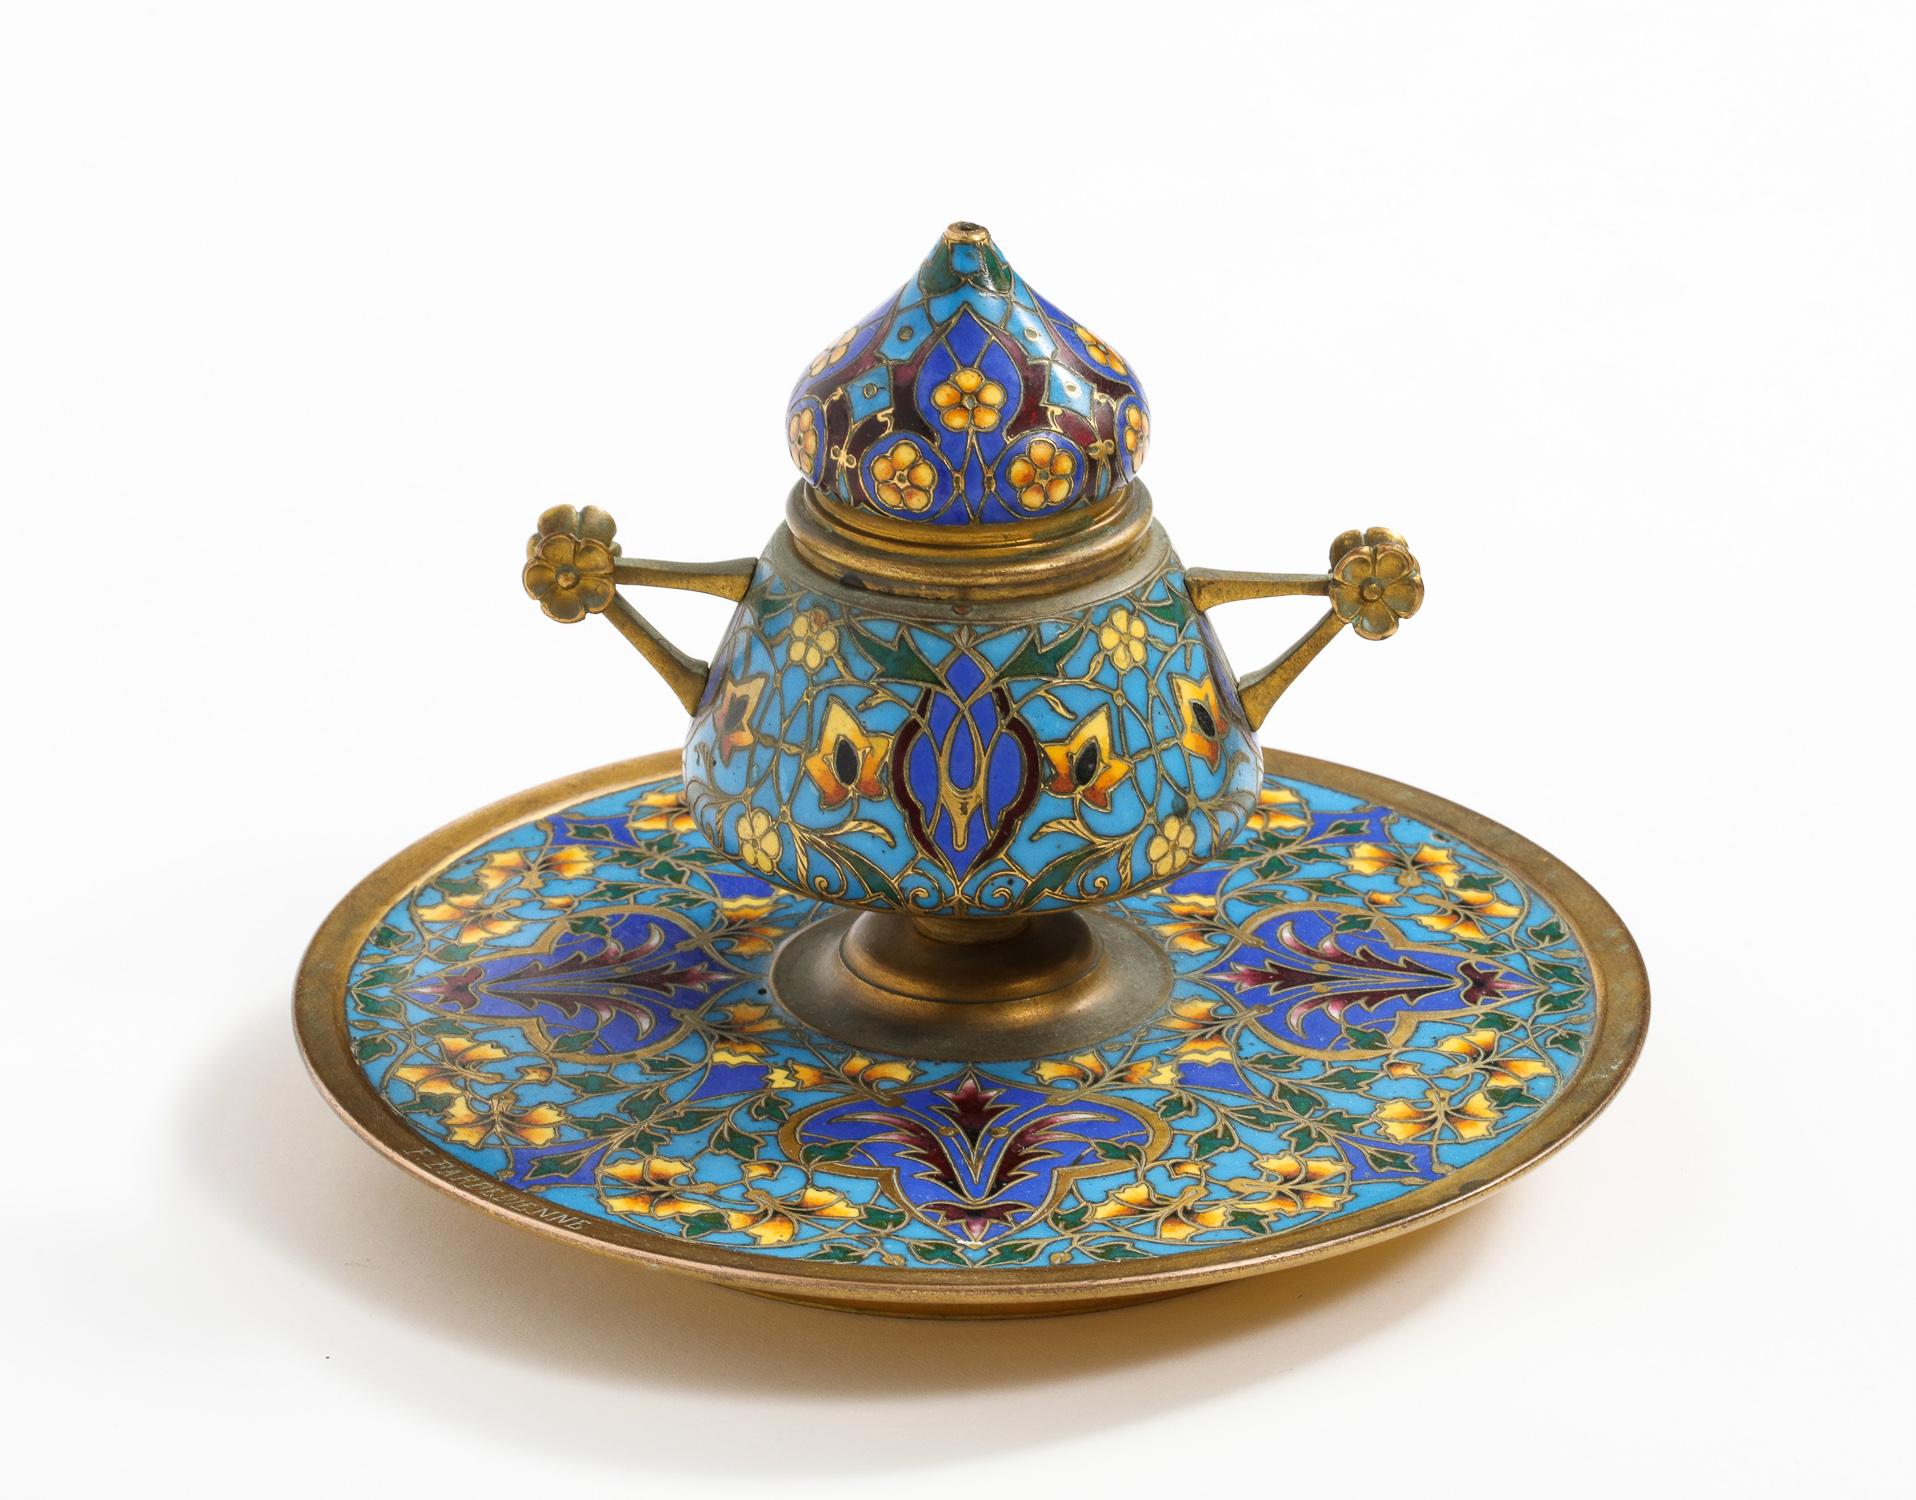 French bronze and Champleve Cloisonne enamel inkwell Encrier by Ferdinand Barbedienne, circa 1870.

Signed F. Barbedienne

Measures: 5.5